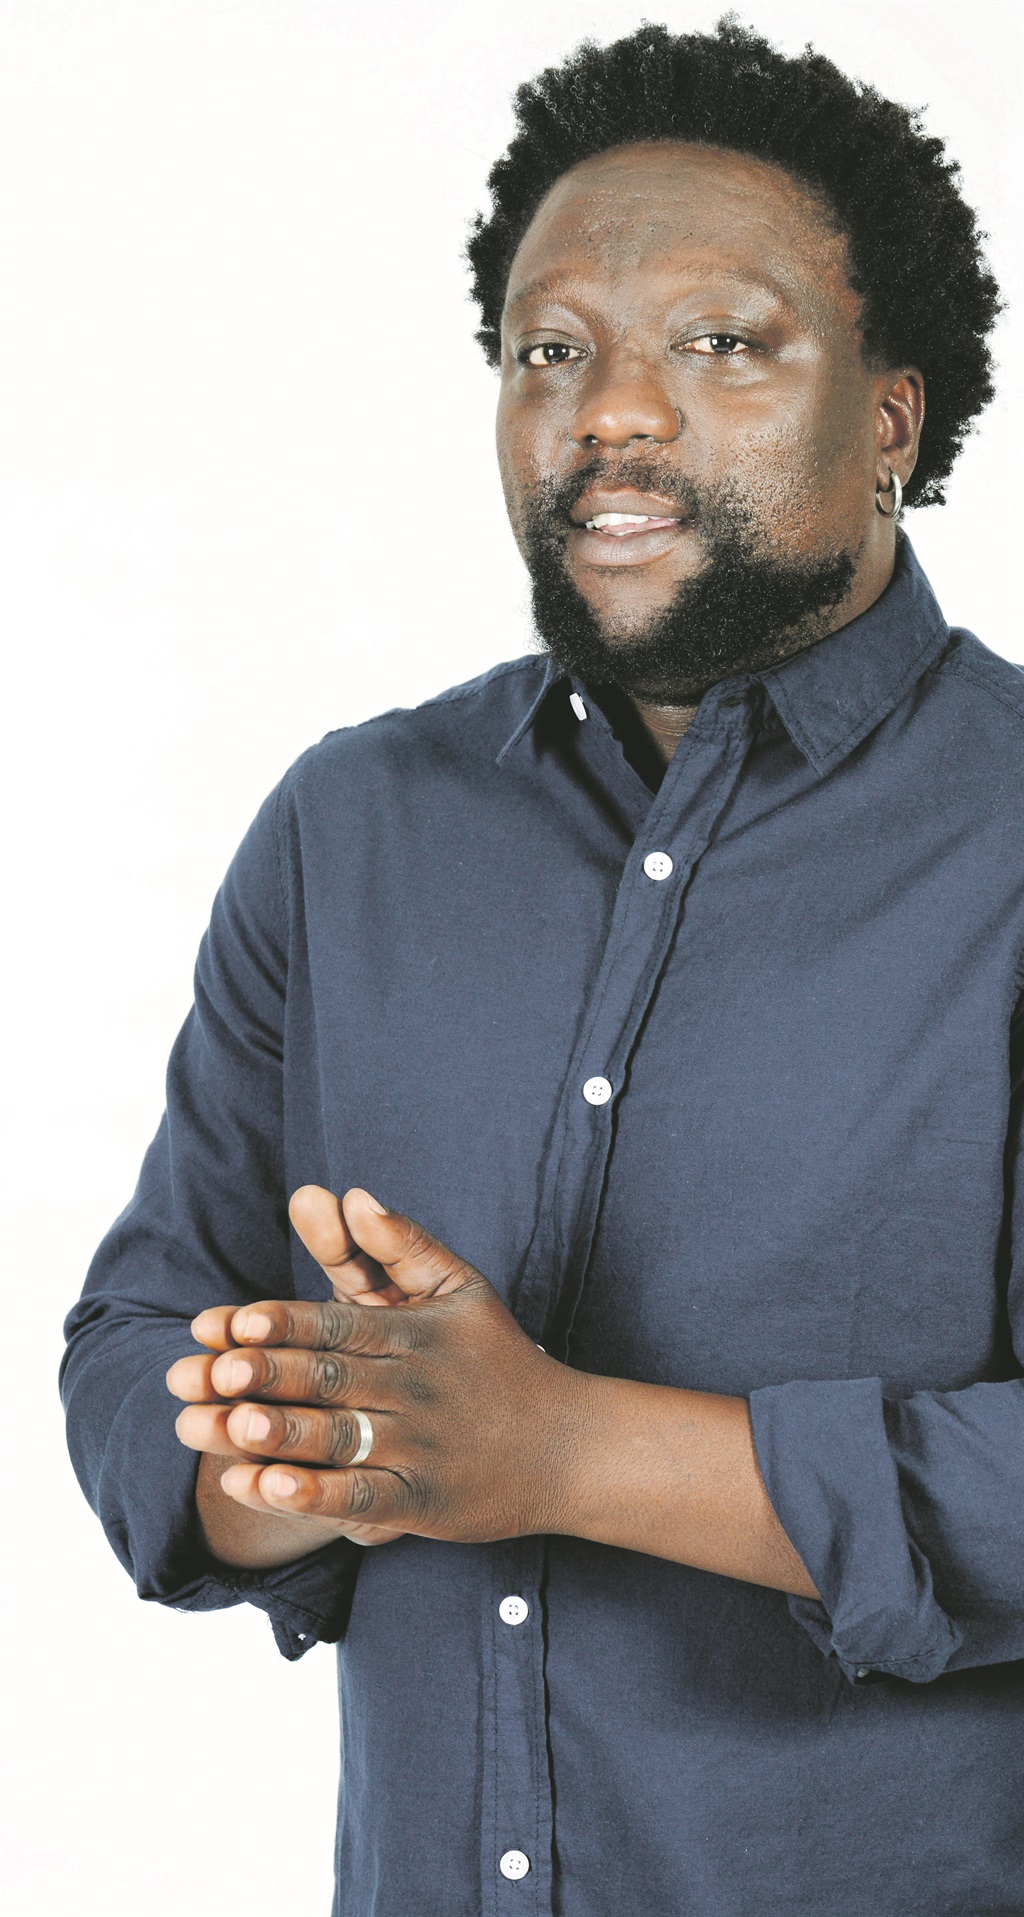 Kwaito star Bonginkosi “Zola 7” Dlamini isallegedly haunted by demons who come at night. 